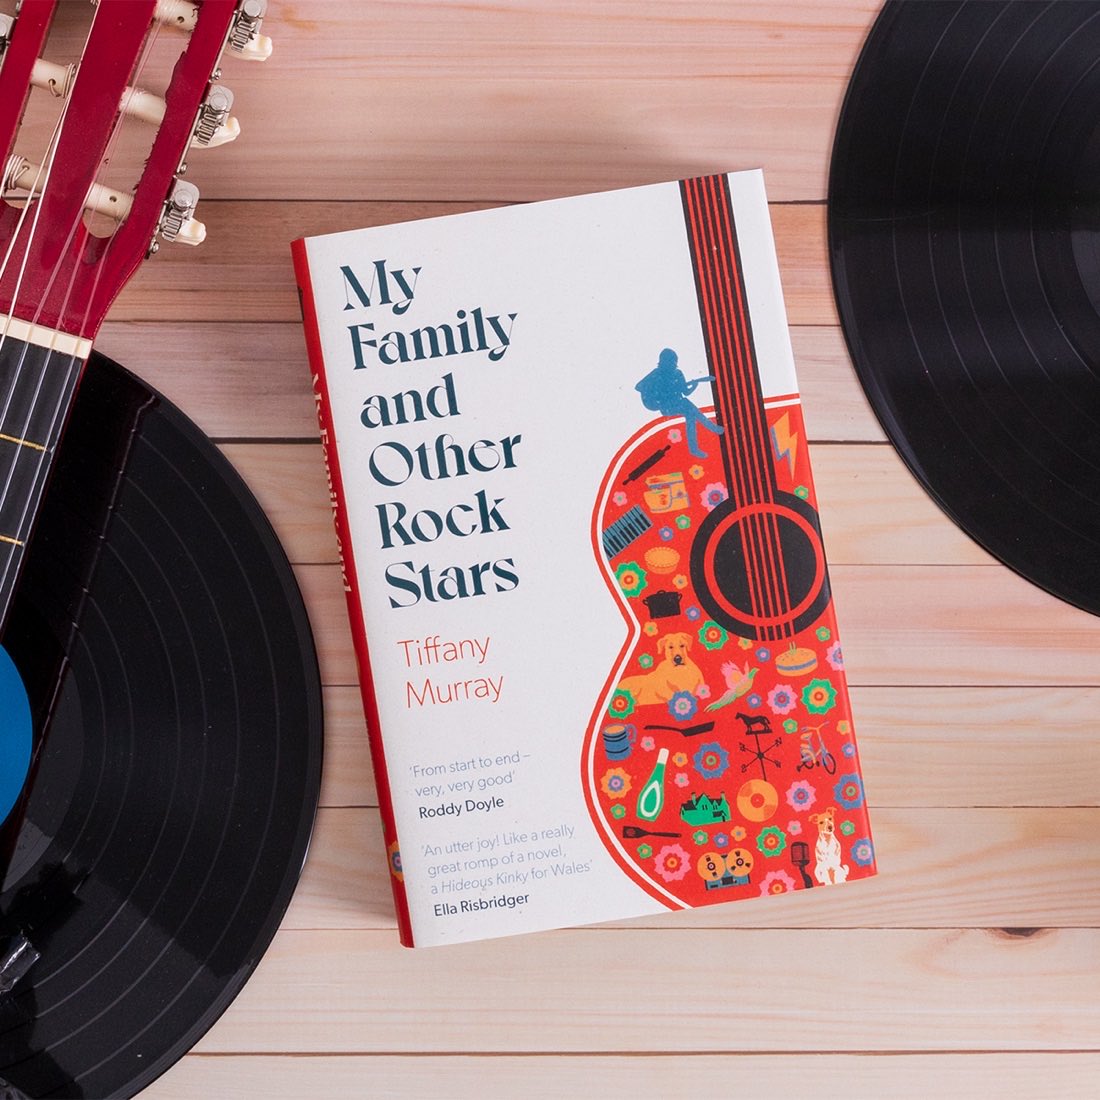 My Family and Other Rock Stars is published today. Thank you brilliant ⁦@FleetReads⁩ ⁦@RhiannonRSmith⁩ (PP&P) ⁦@GraceEVincent⁩ ⁦@katyaellis_⁩ ⁦@Lielco⁩ my ⁦@Taffyagent⁩ & all the dogs & rock stars & mothers. Sally Field, over & out. Pls buy it.